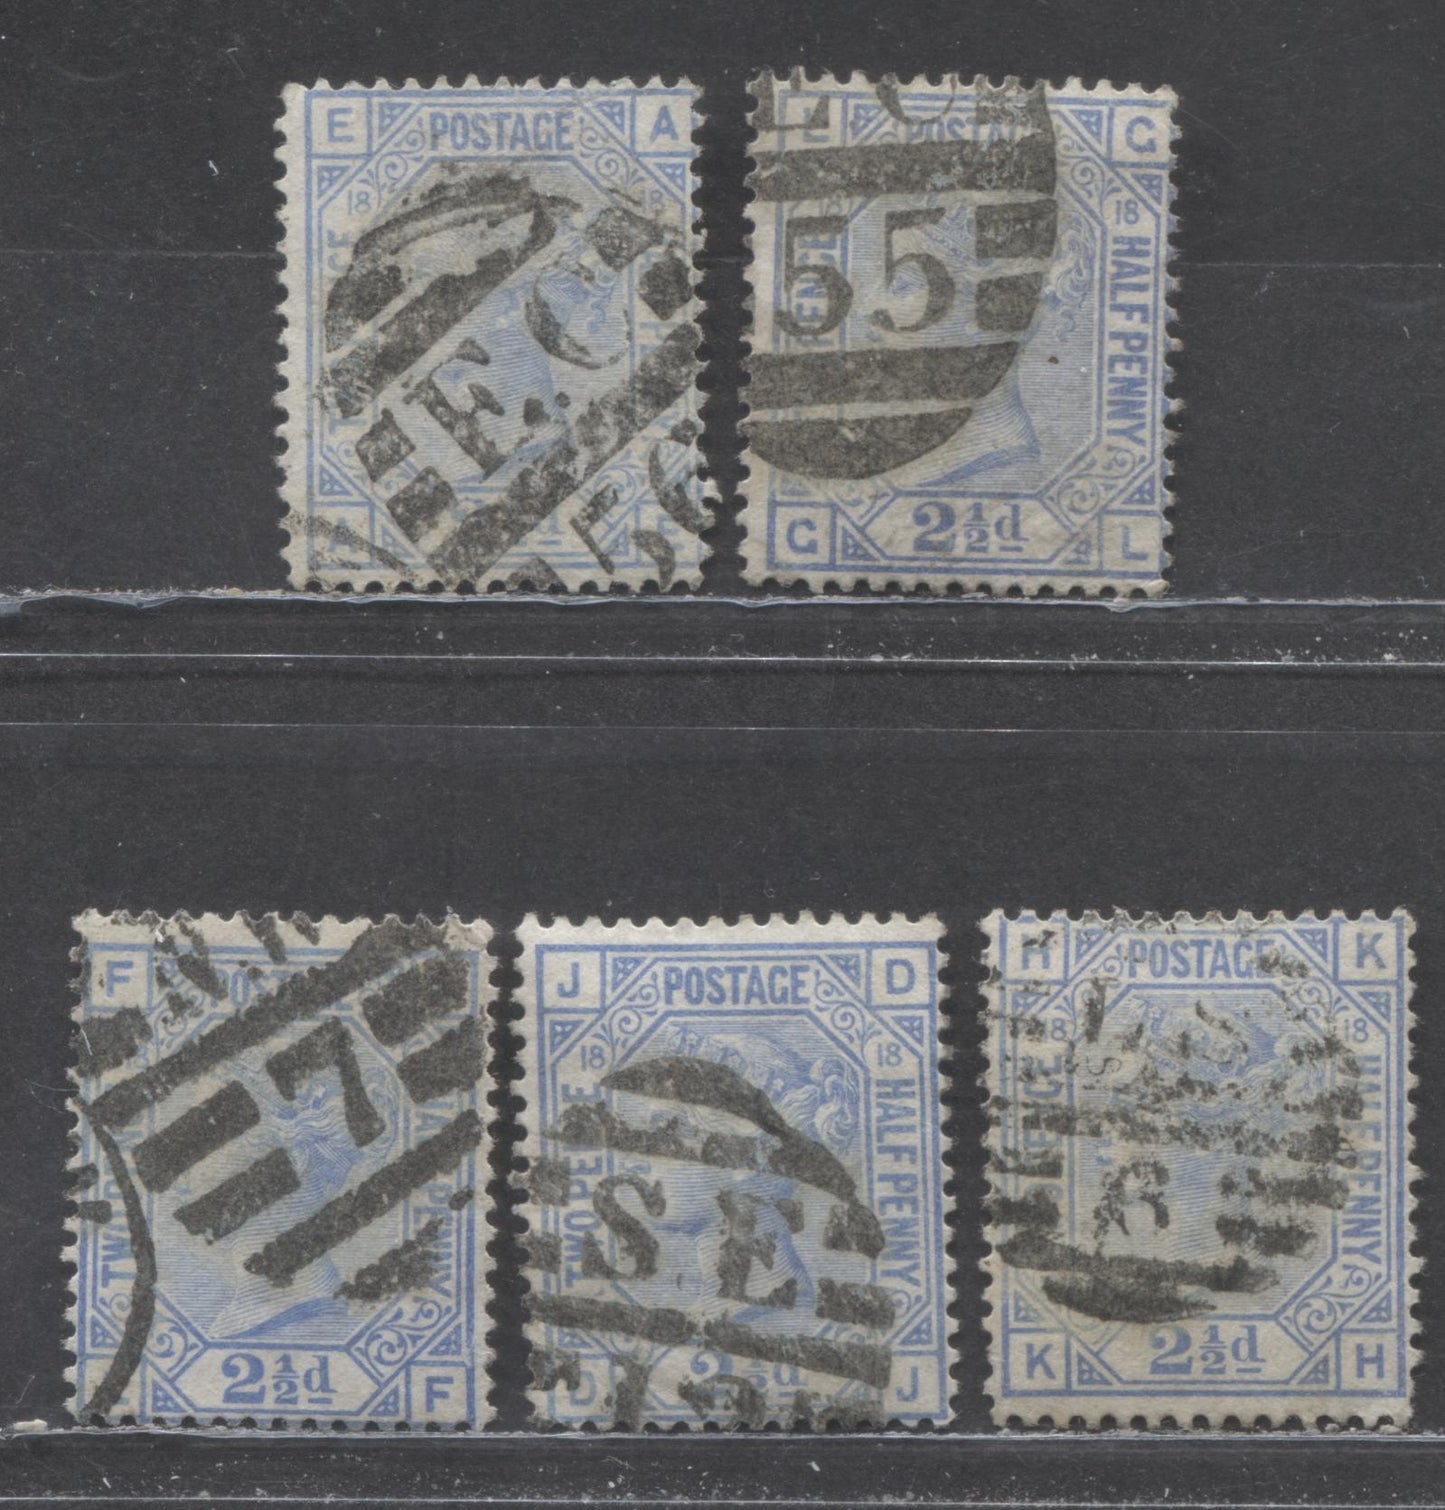 Lot 153 Great Britain SC#68 (SG#142) 2 1/2d Blue 1880 Large Coloured Corner Letters - Surface-Printed Issue, Plate 18 Printing, Orb Wmk, London District Cancels, 5 Very Good Used Examples, Click on Listing to See ALL Pictures, Estimated Value $68